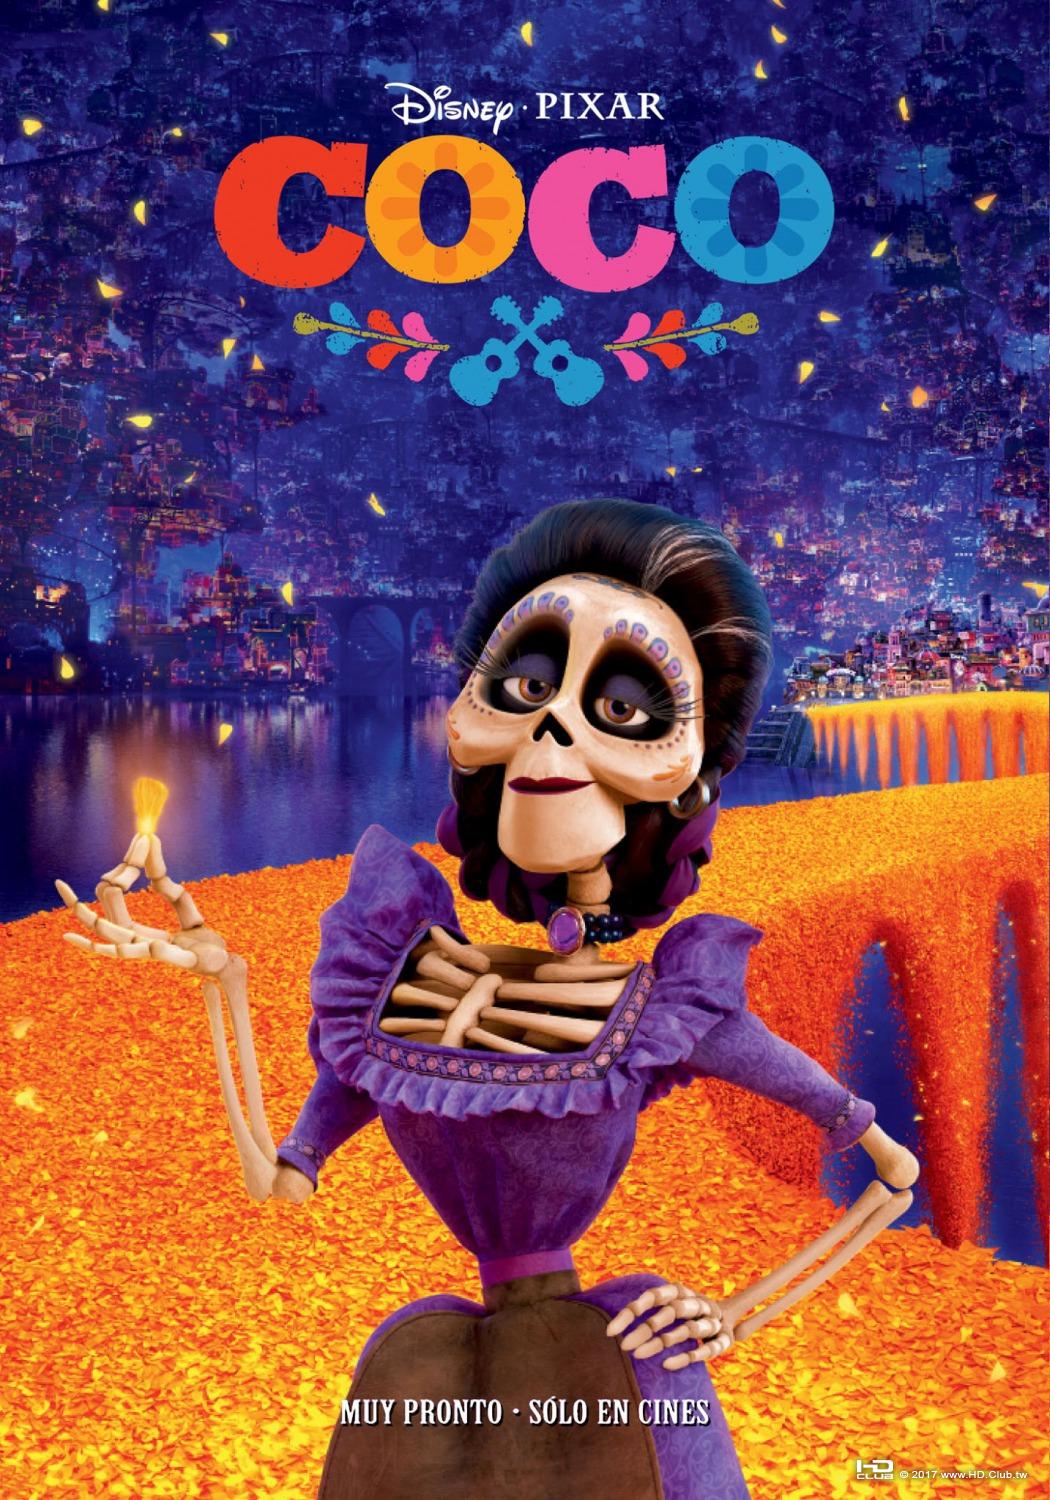 coco_ver11_xlg.jpg